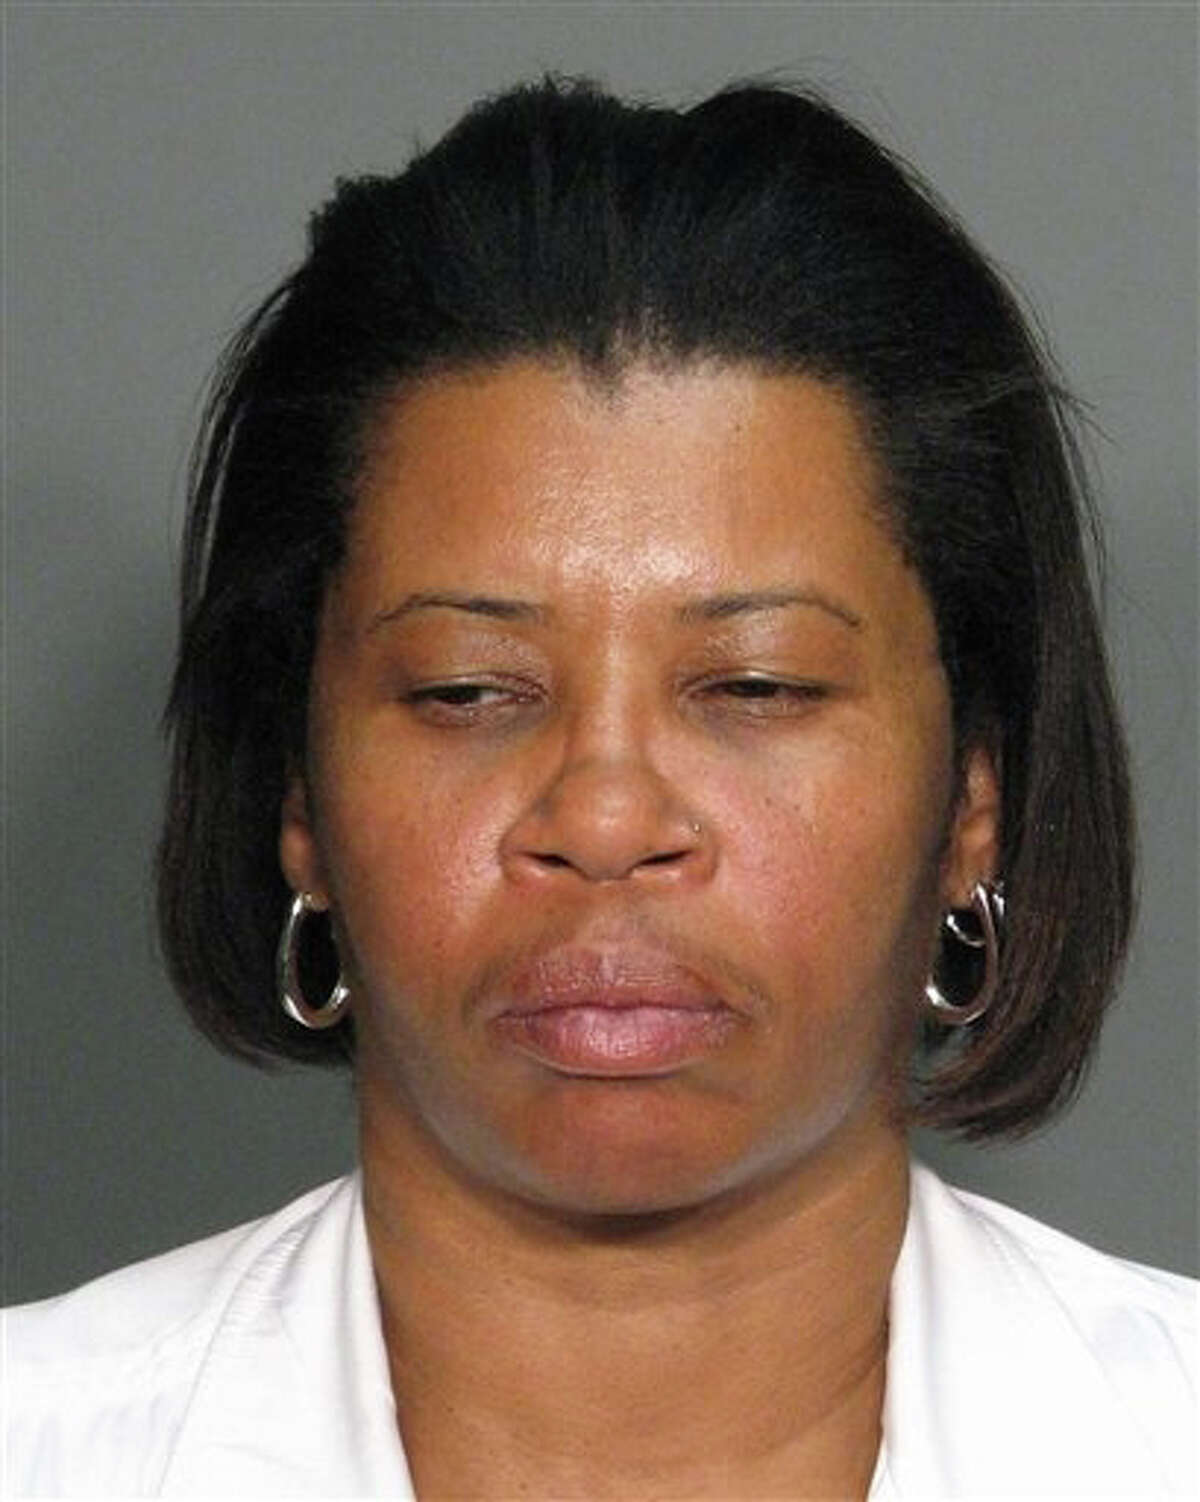 Ann Pettway turned herself in on Sunday, Jan. 23, 2011 to authorities in Bridgeport, Conn. Pettway was charged in 1987 kidnapping of Carlina White from Harlem Hospital in New York City.